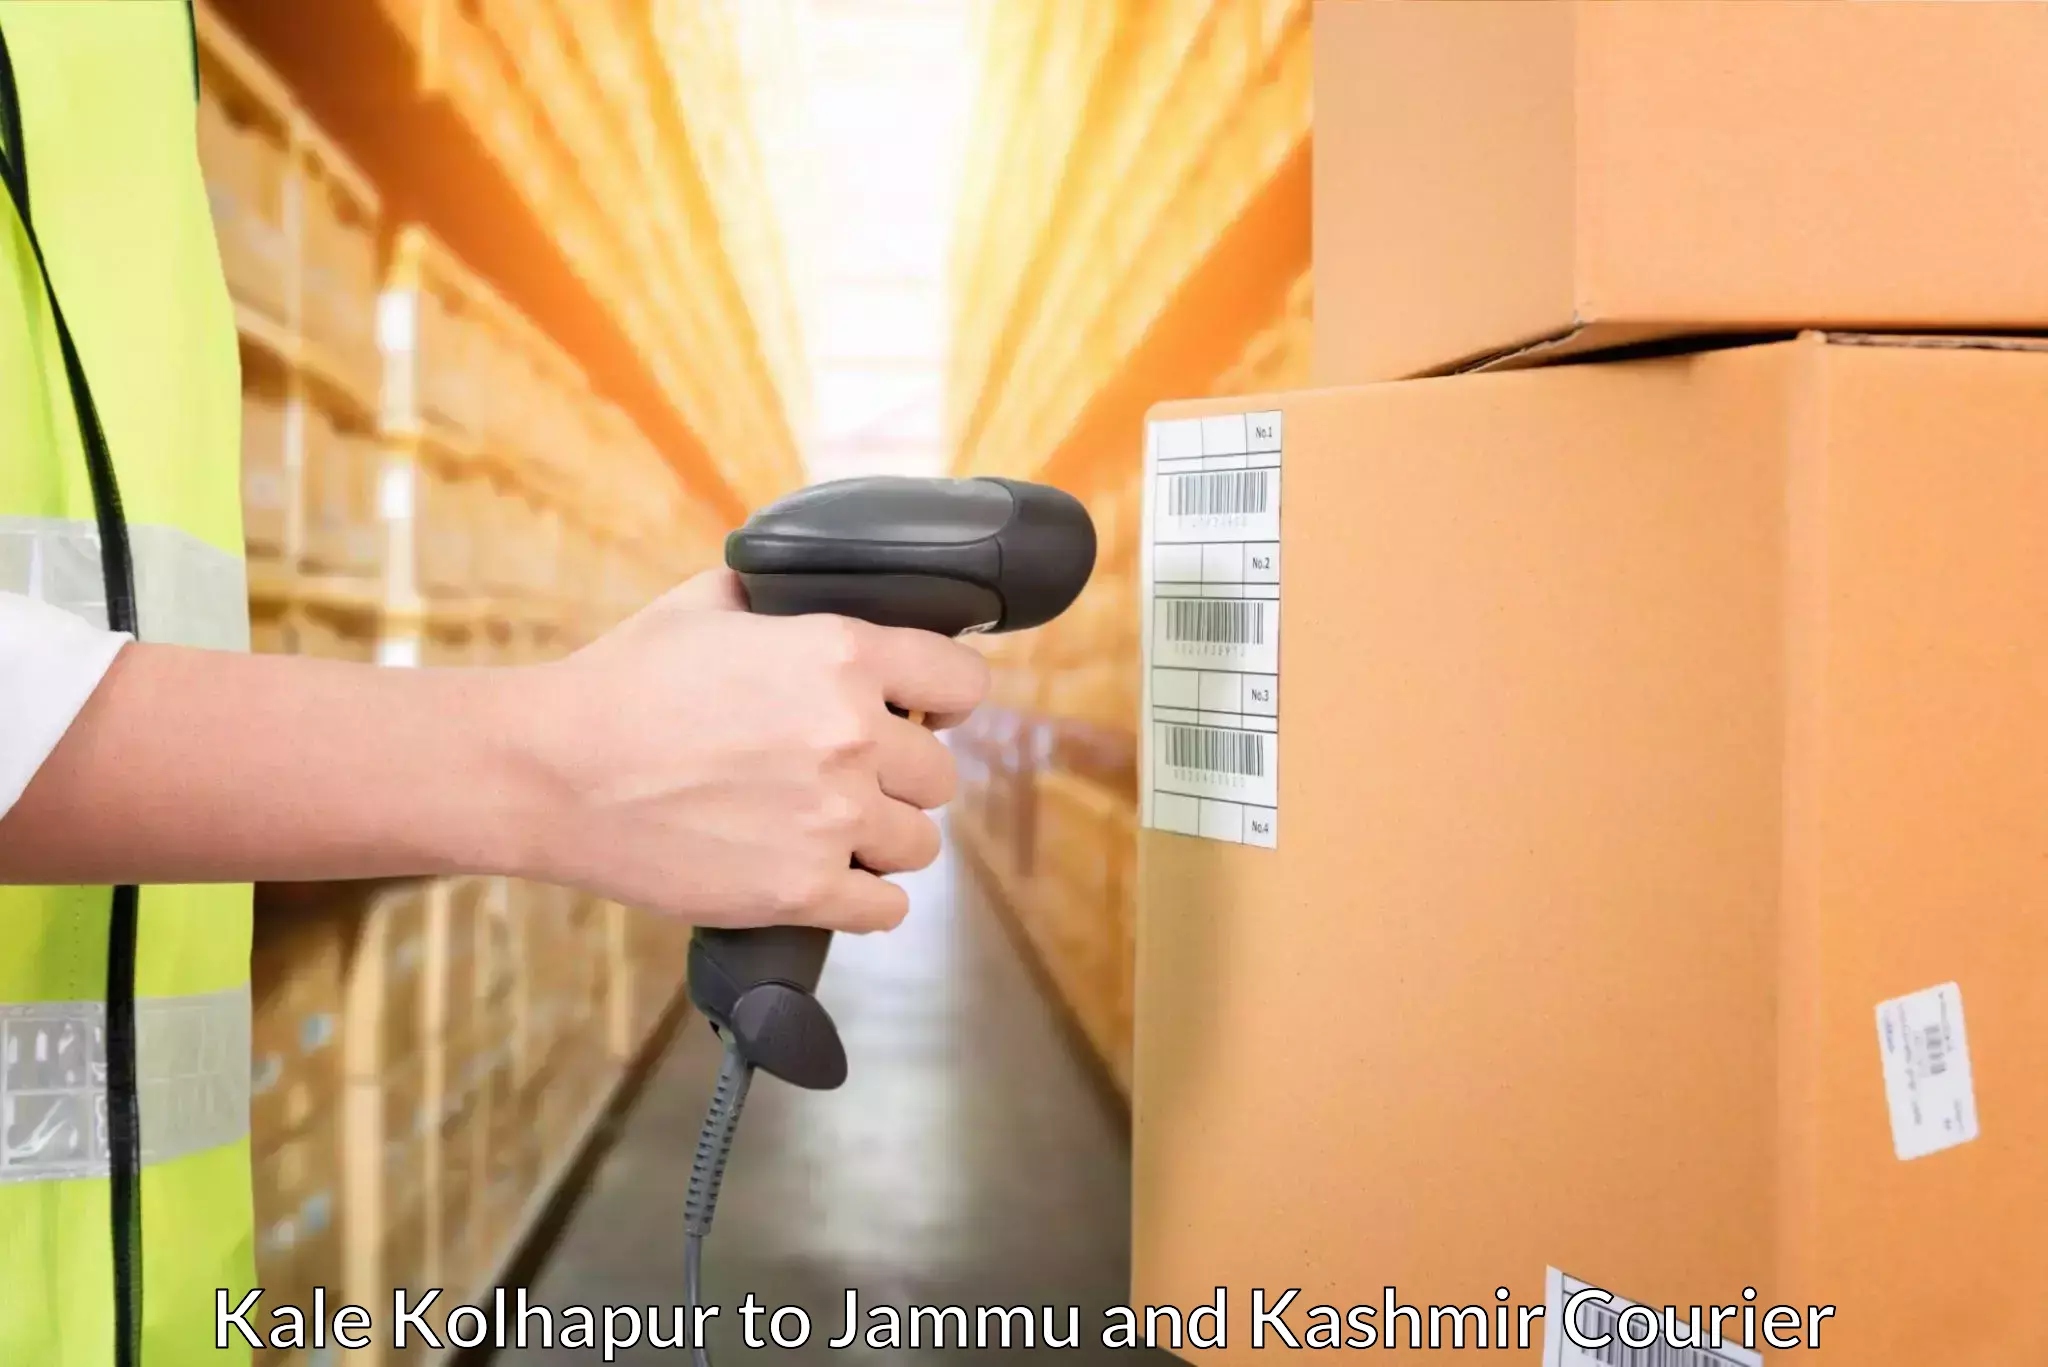 Special handling courier in Kale Kolhapur to Bandipur